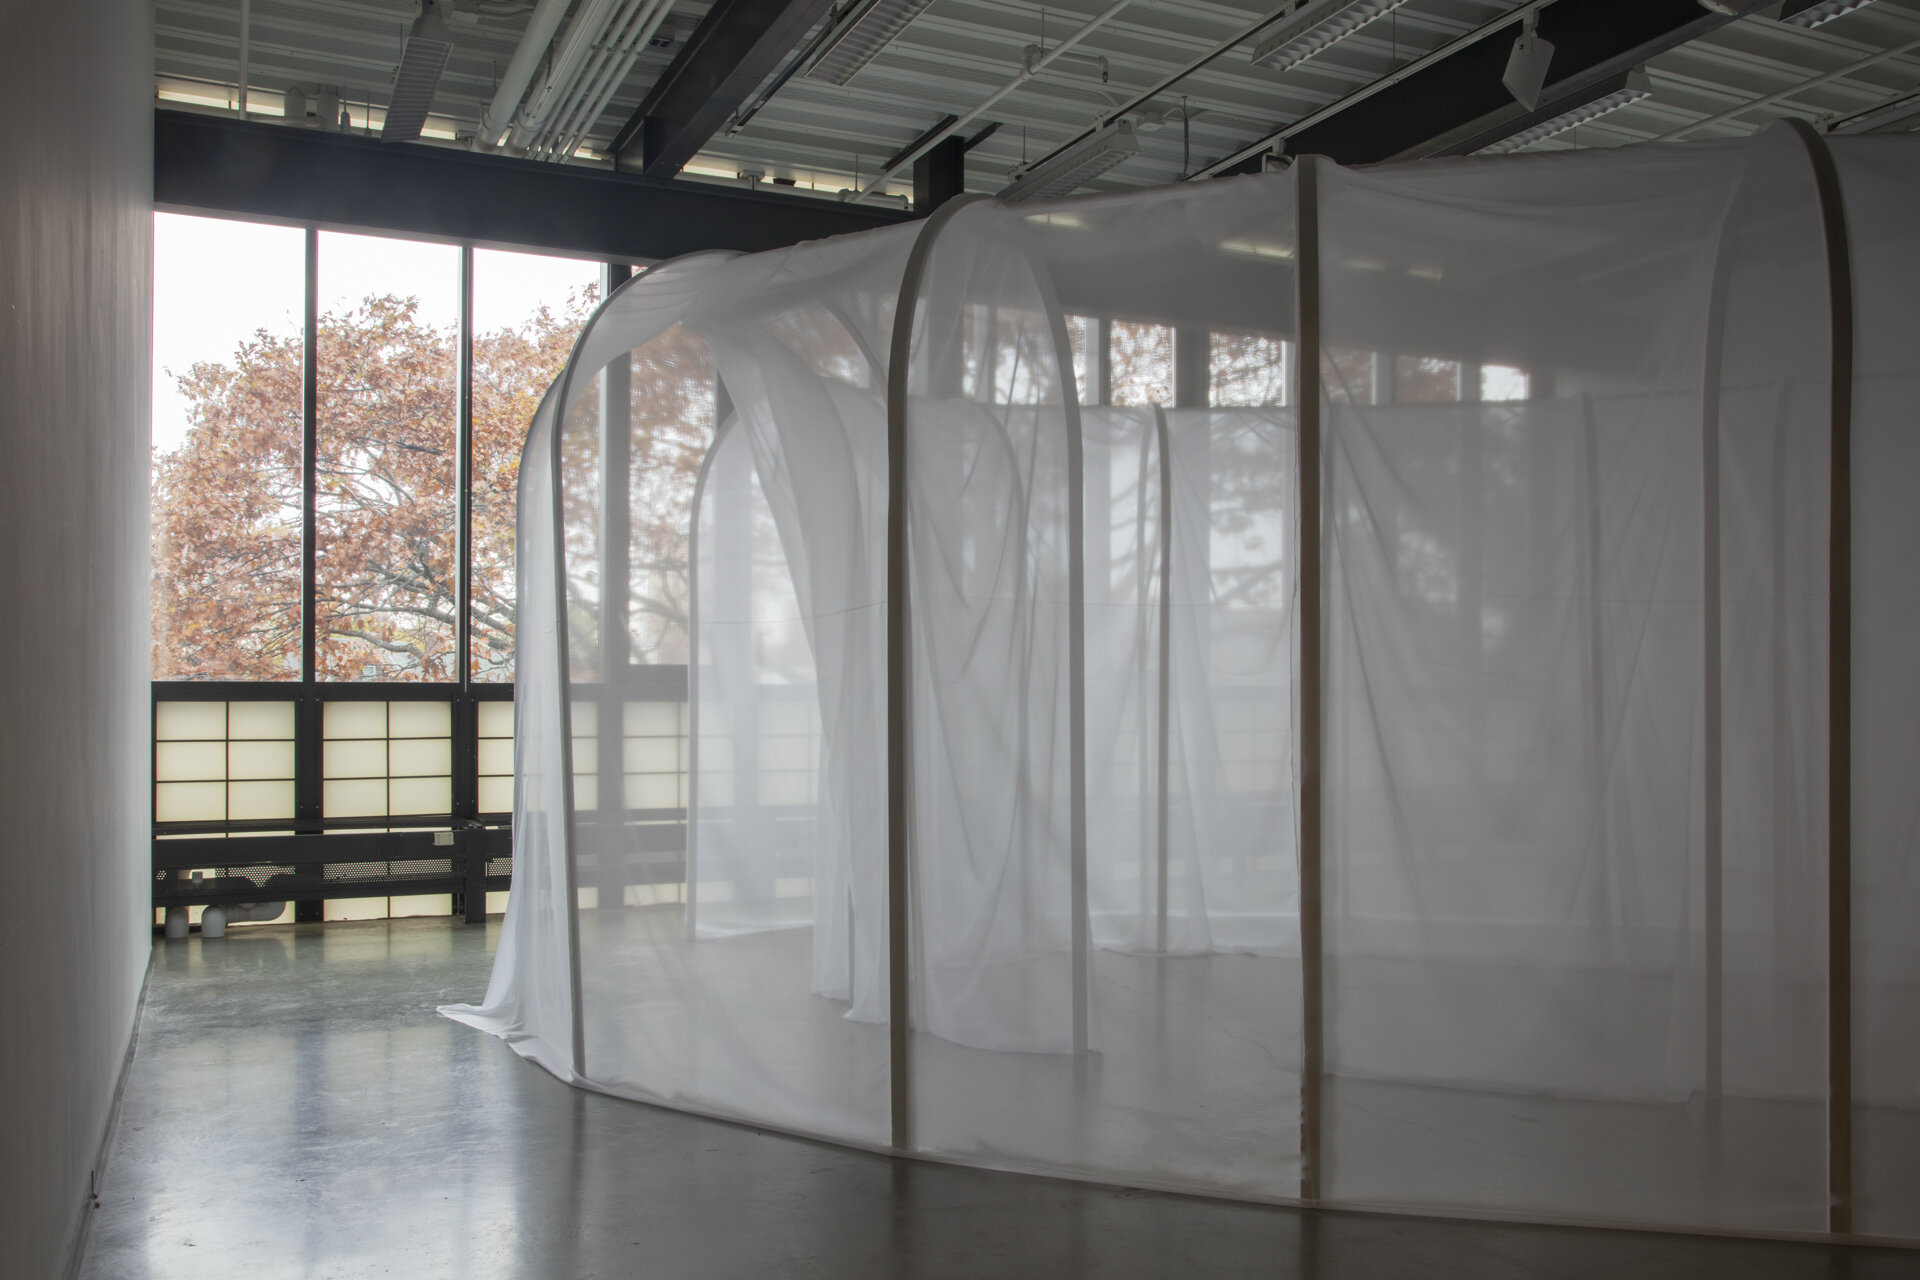  Randi Renate  and here I dreamt, in a subaqueous state, that we had no bodies , 2018  high theatrical scrim, hardwood, wax, straight pins, hardware 177 x 106 x 233 inches (450 x 270 x 600 cm) 